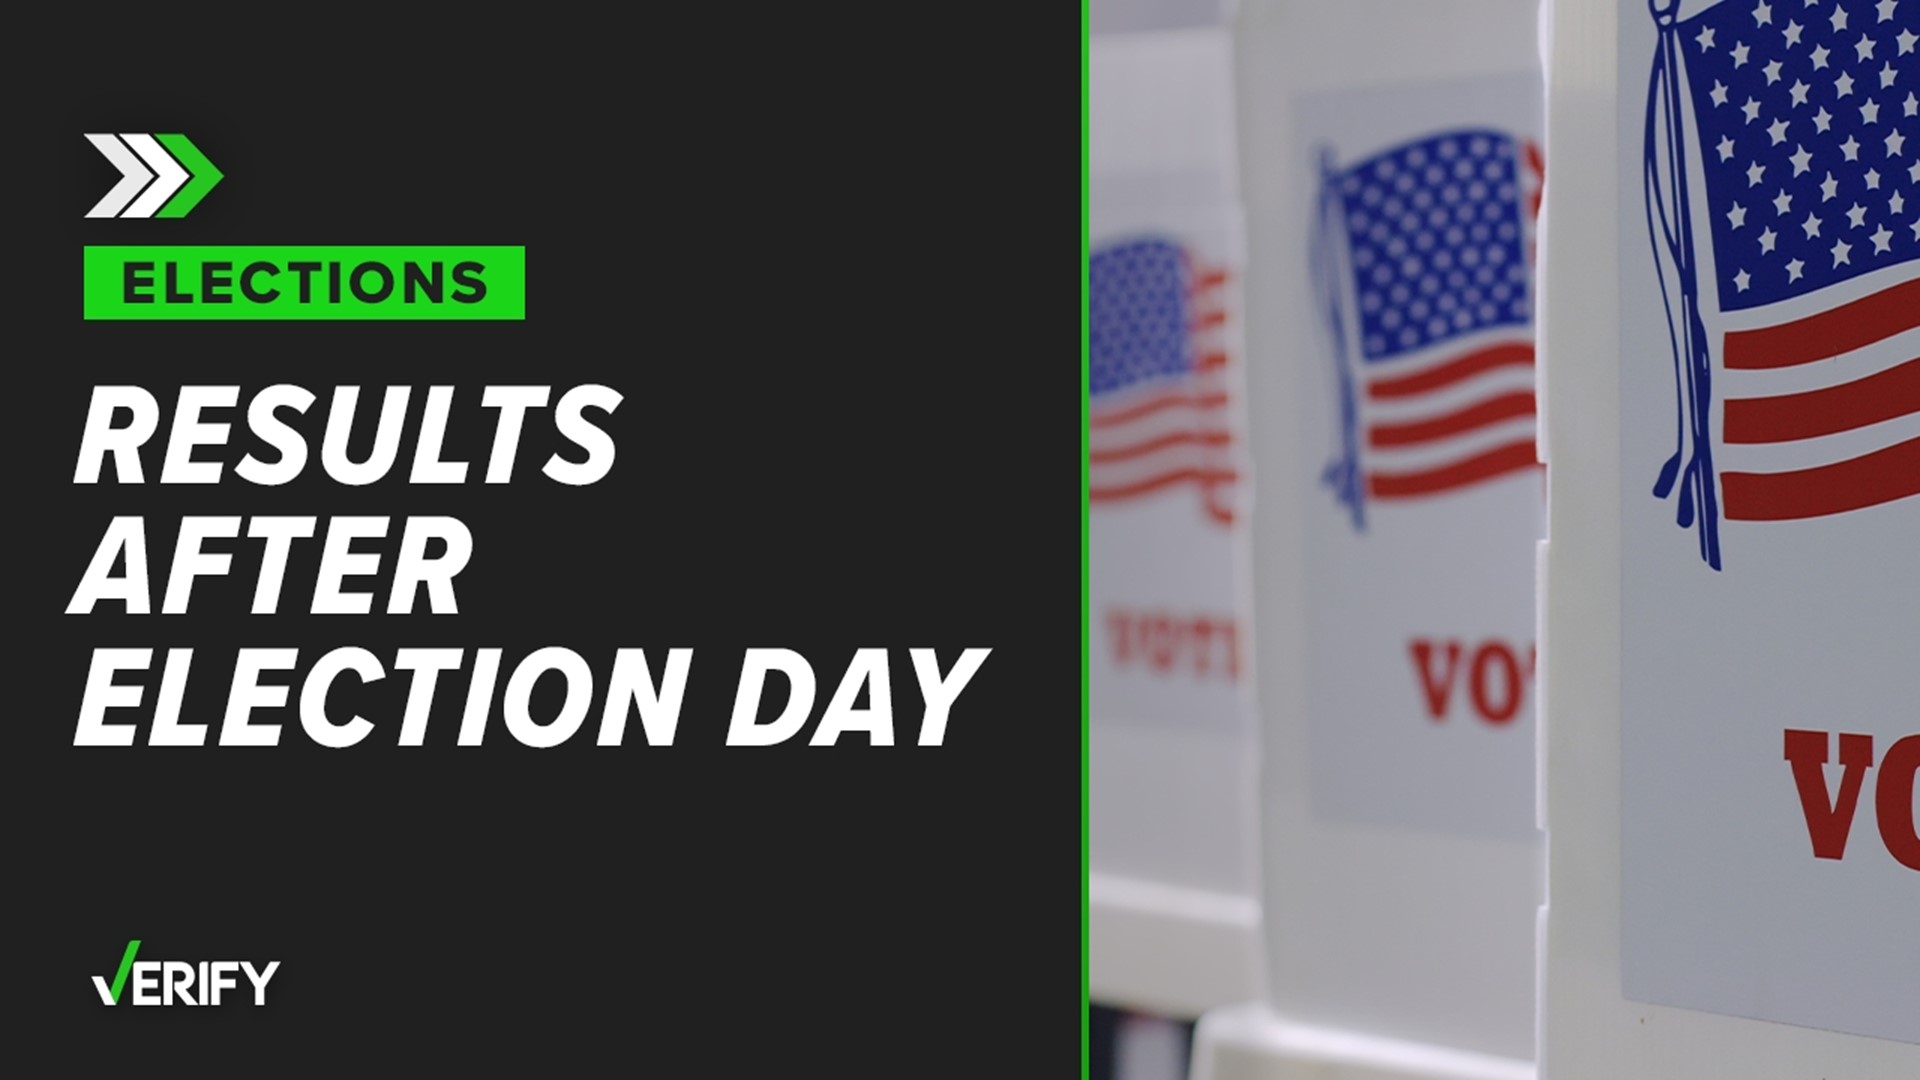 Different states have different ballot-counting protocols, which means we won't know the results of some races until several days after the polls close.